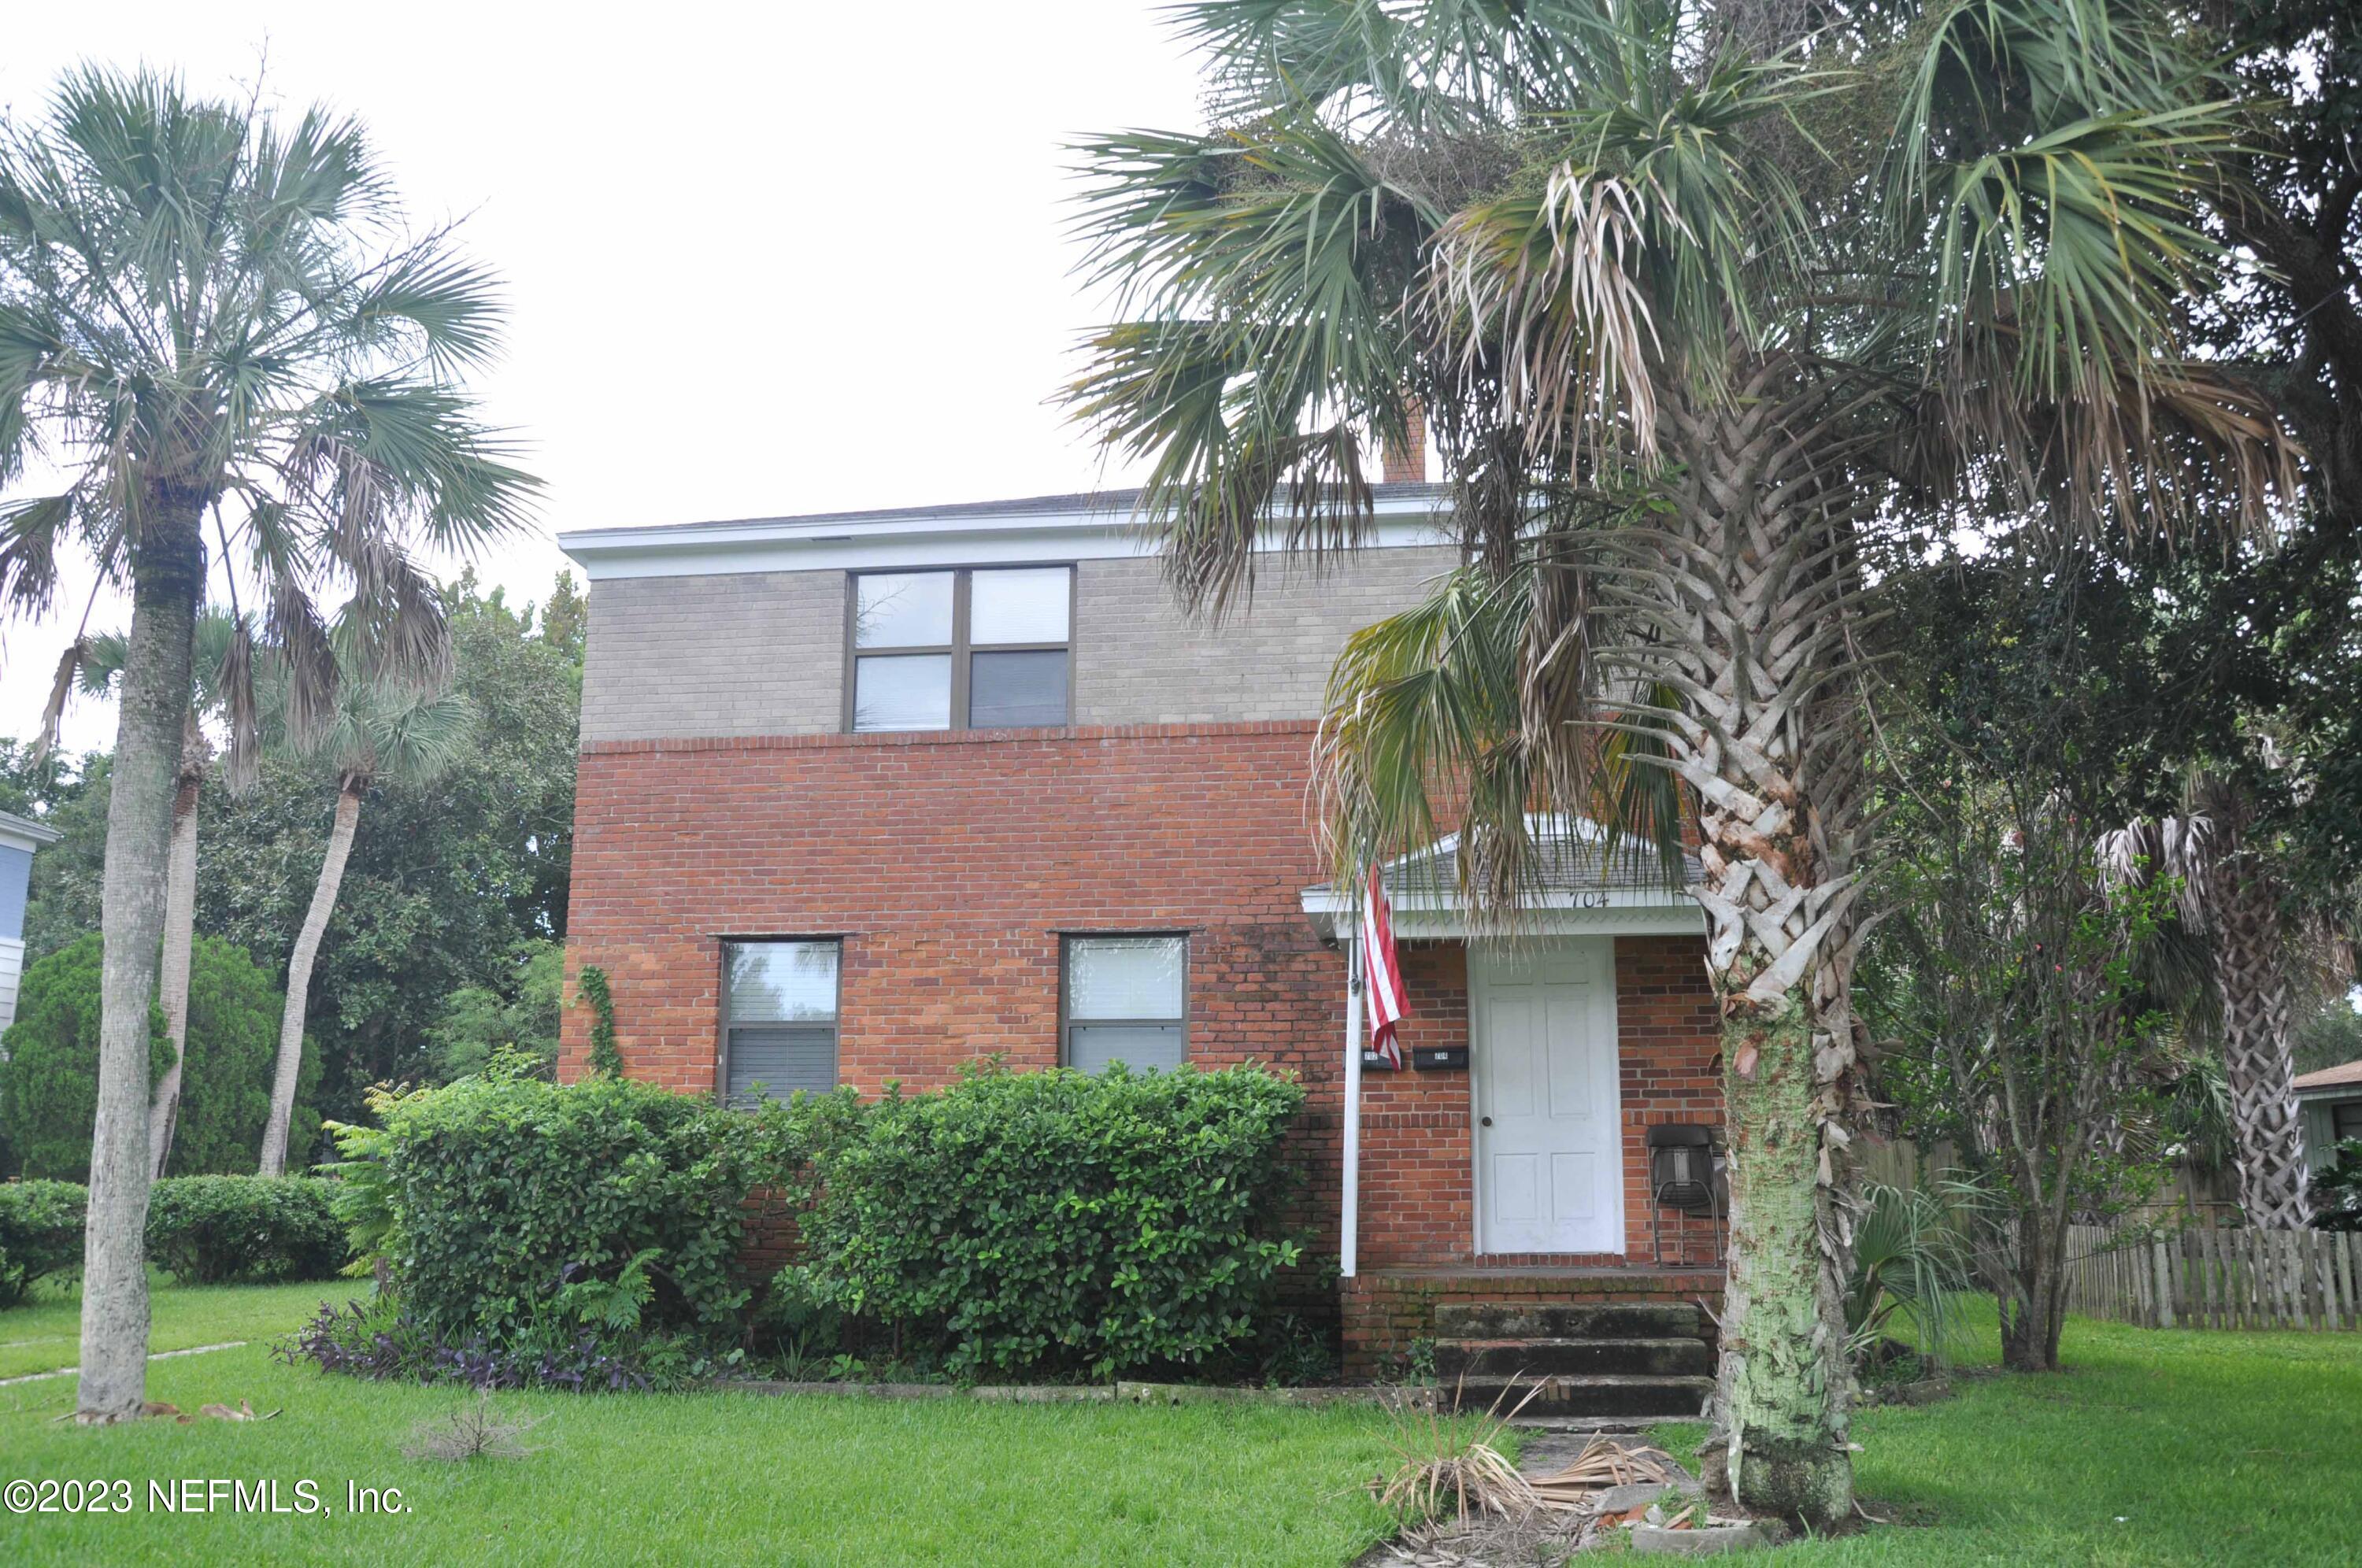 Jacksonville Beach, FL home for sale located at 704 N 13TH Avenue, Jacksonville Beach, FL 32250